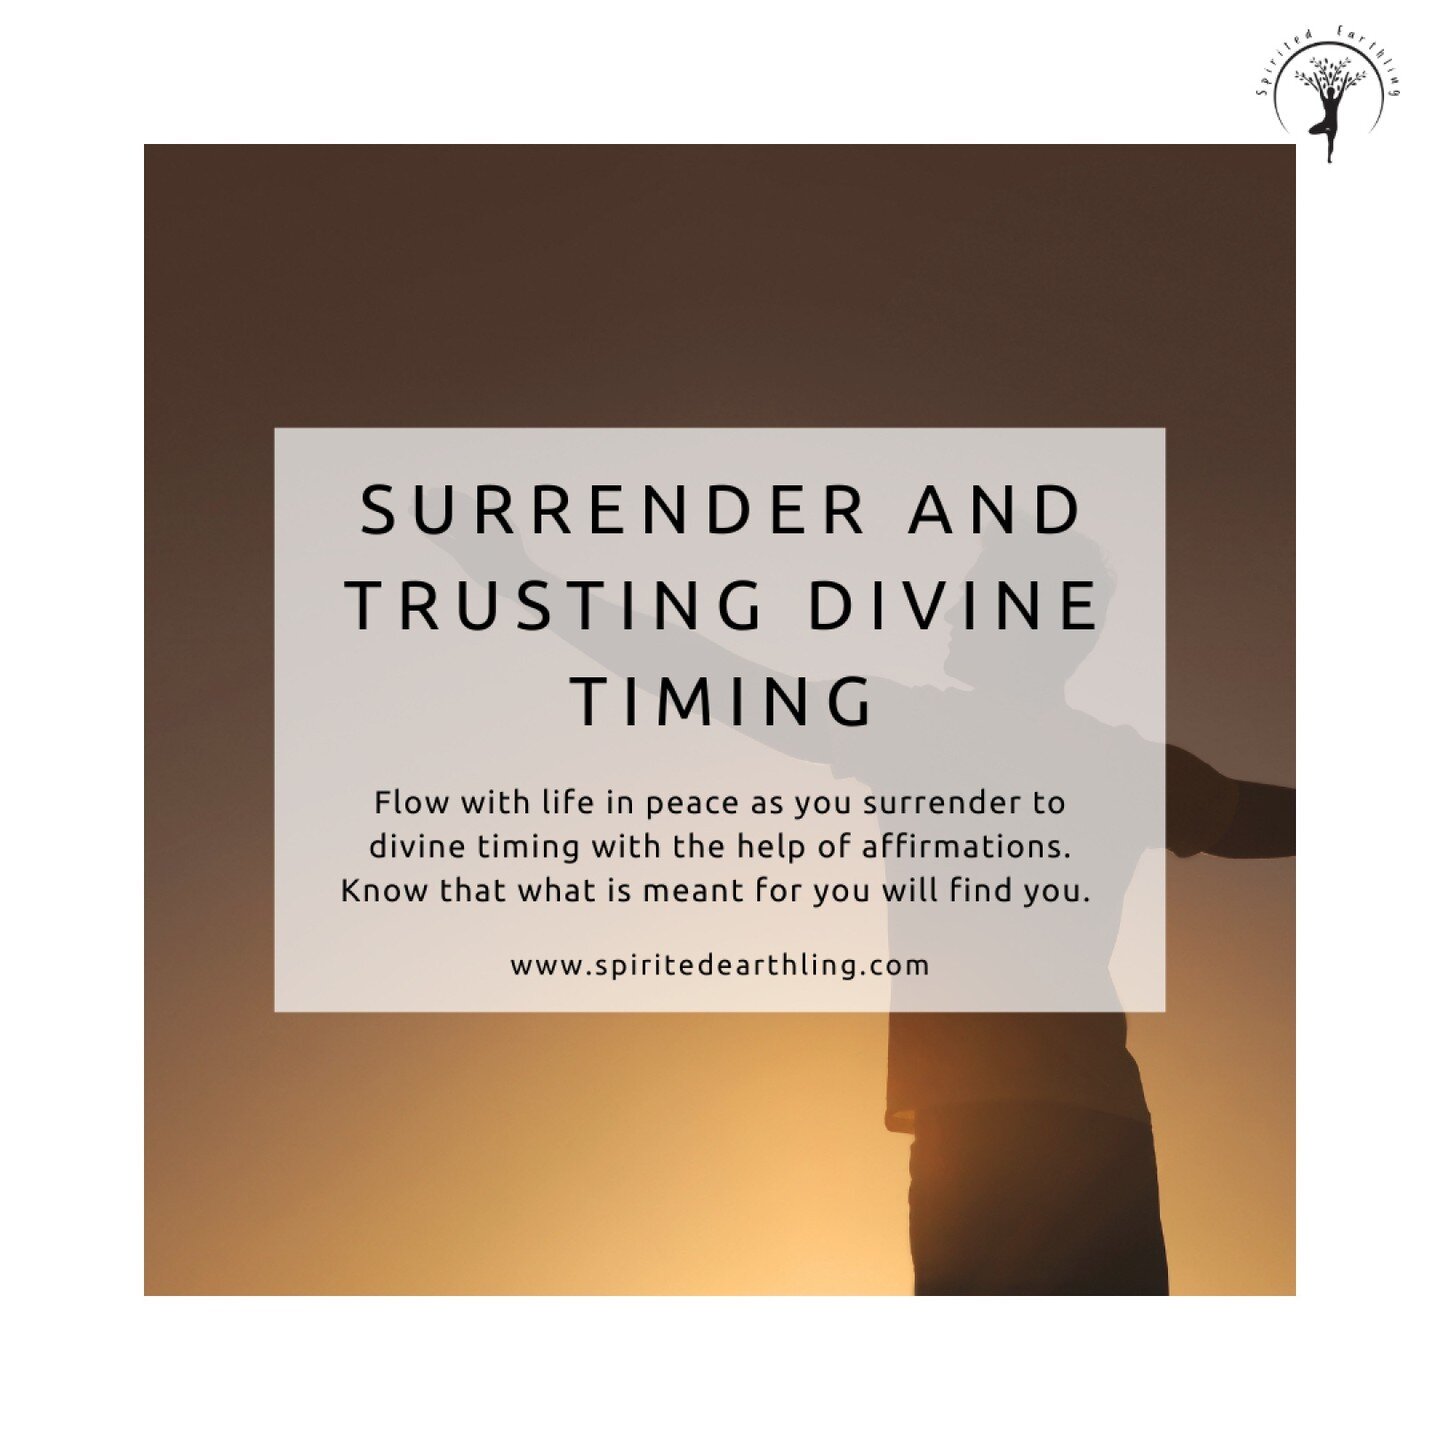 When we surrender to divine timing, we let go of our attachment to specific outcomes and trust that everything will unfold as it should. This doesn't mean that we sit back and do nothing, but rather we take inspired action and trust that our efforts 